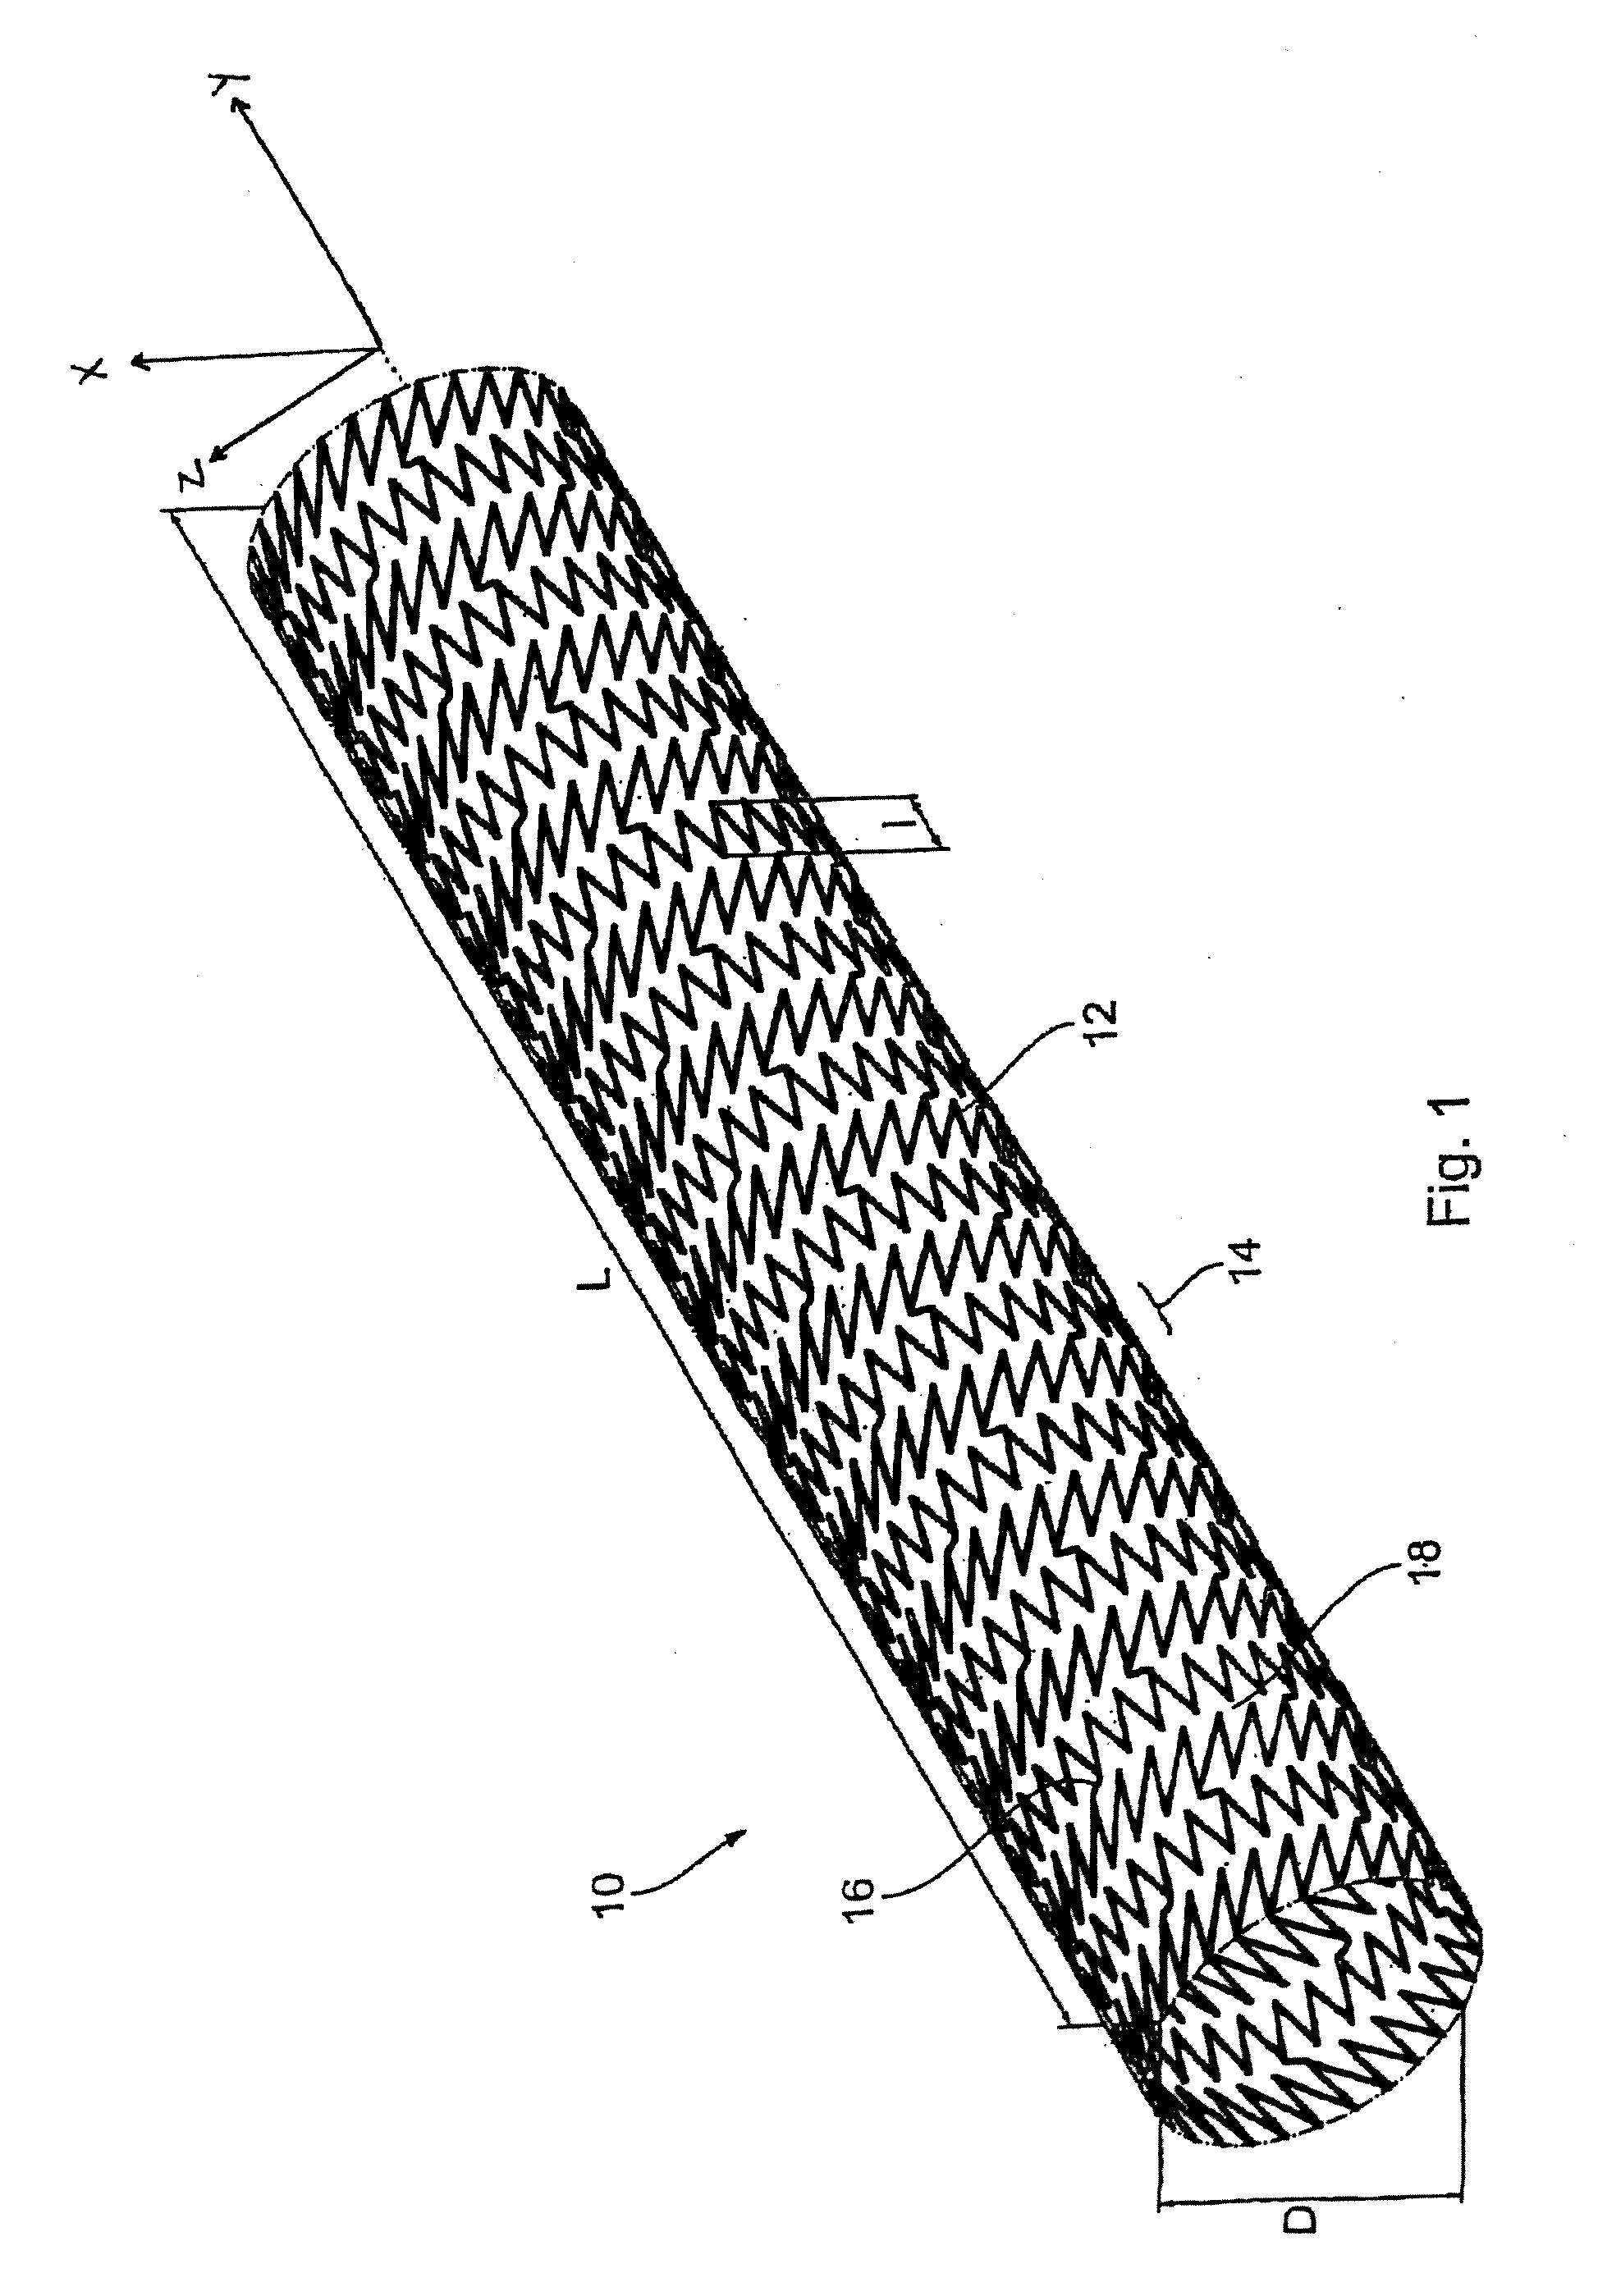 Absorbable medical devices with specific design features